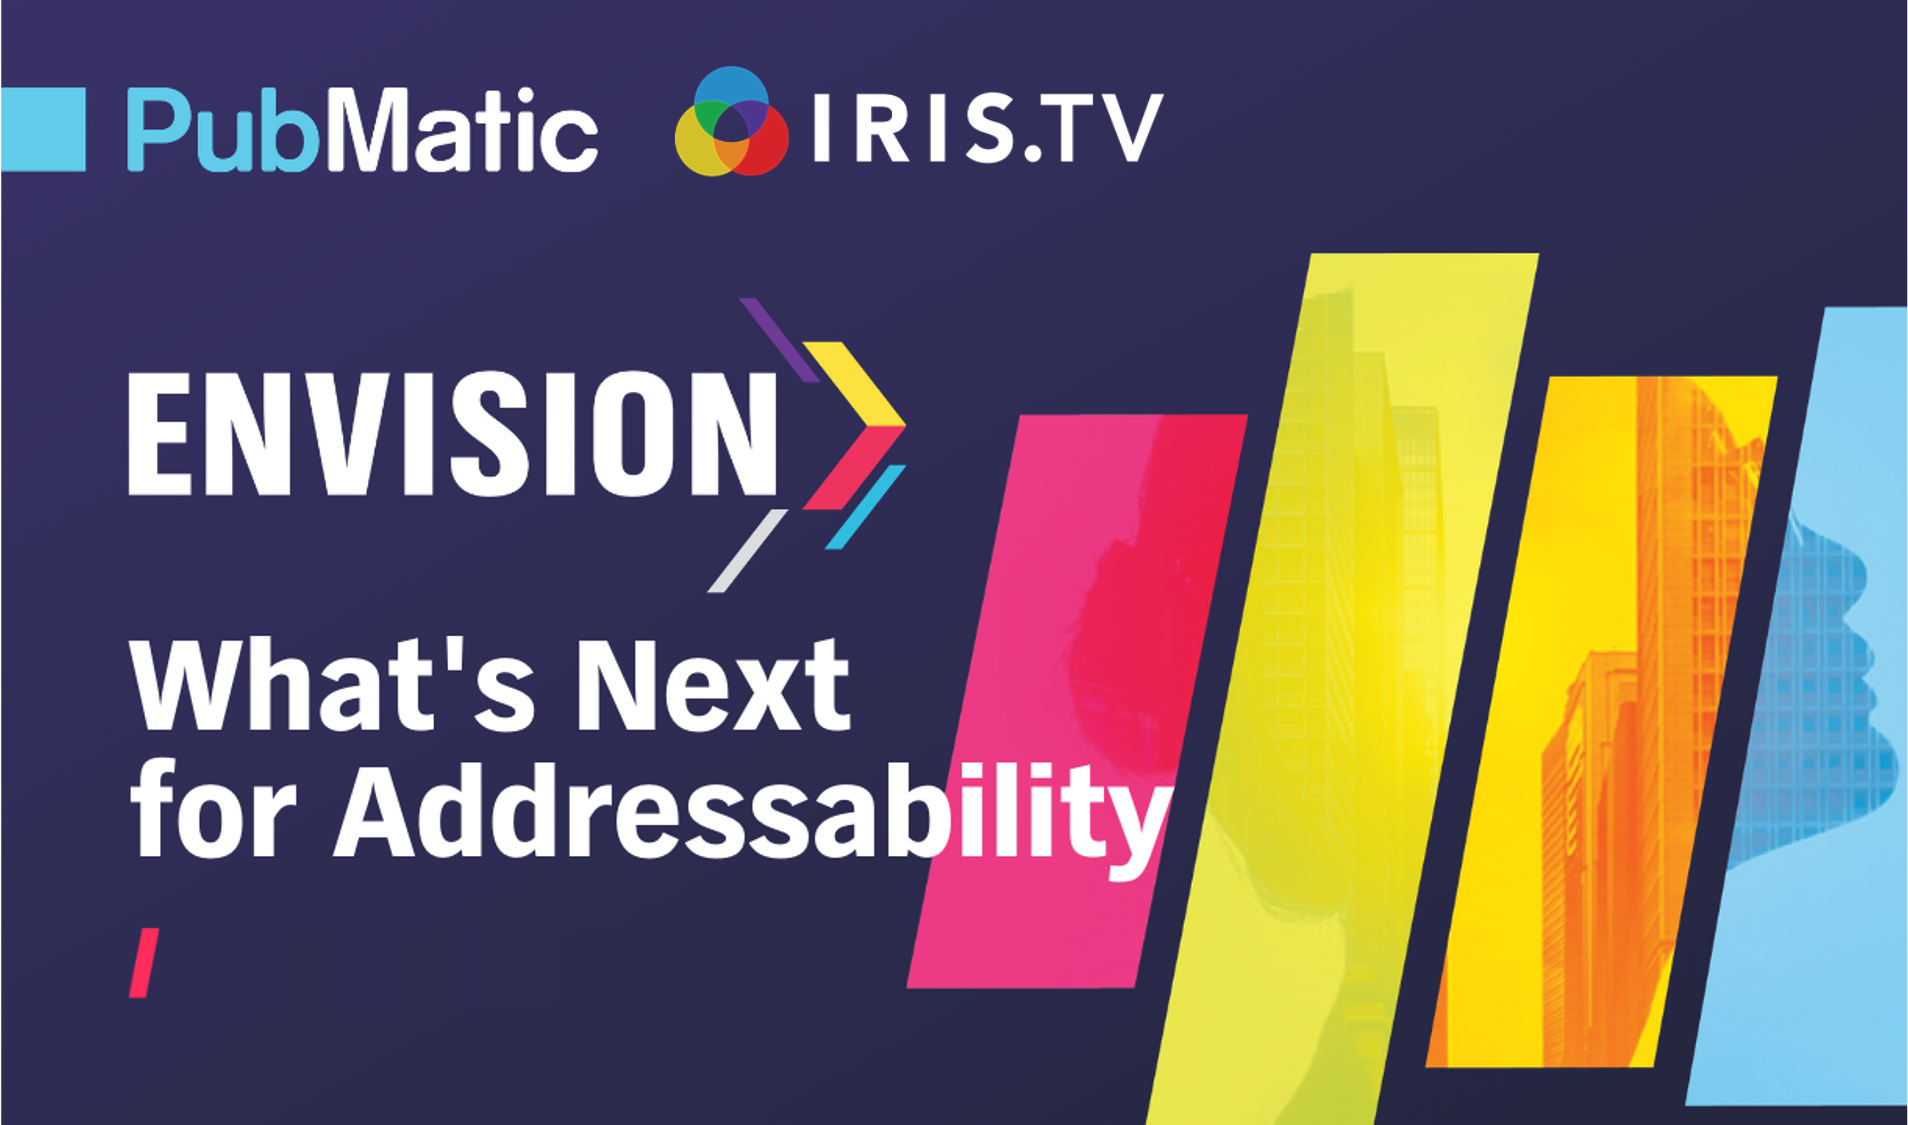 Title - Envision: What's Next for Addressability with logos for PubMatic and IRIS.TV